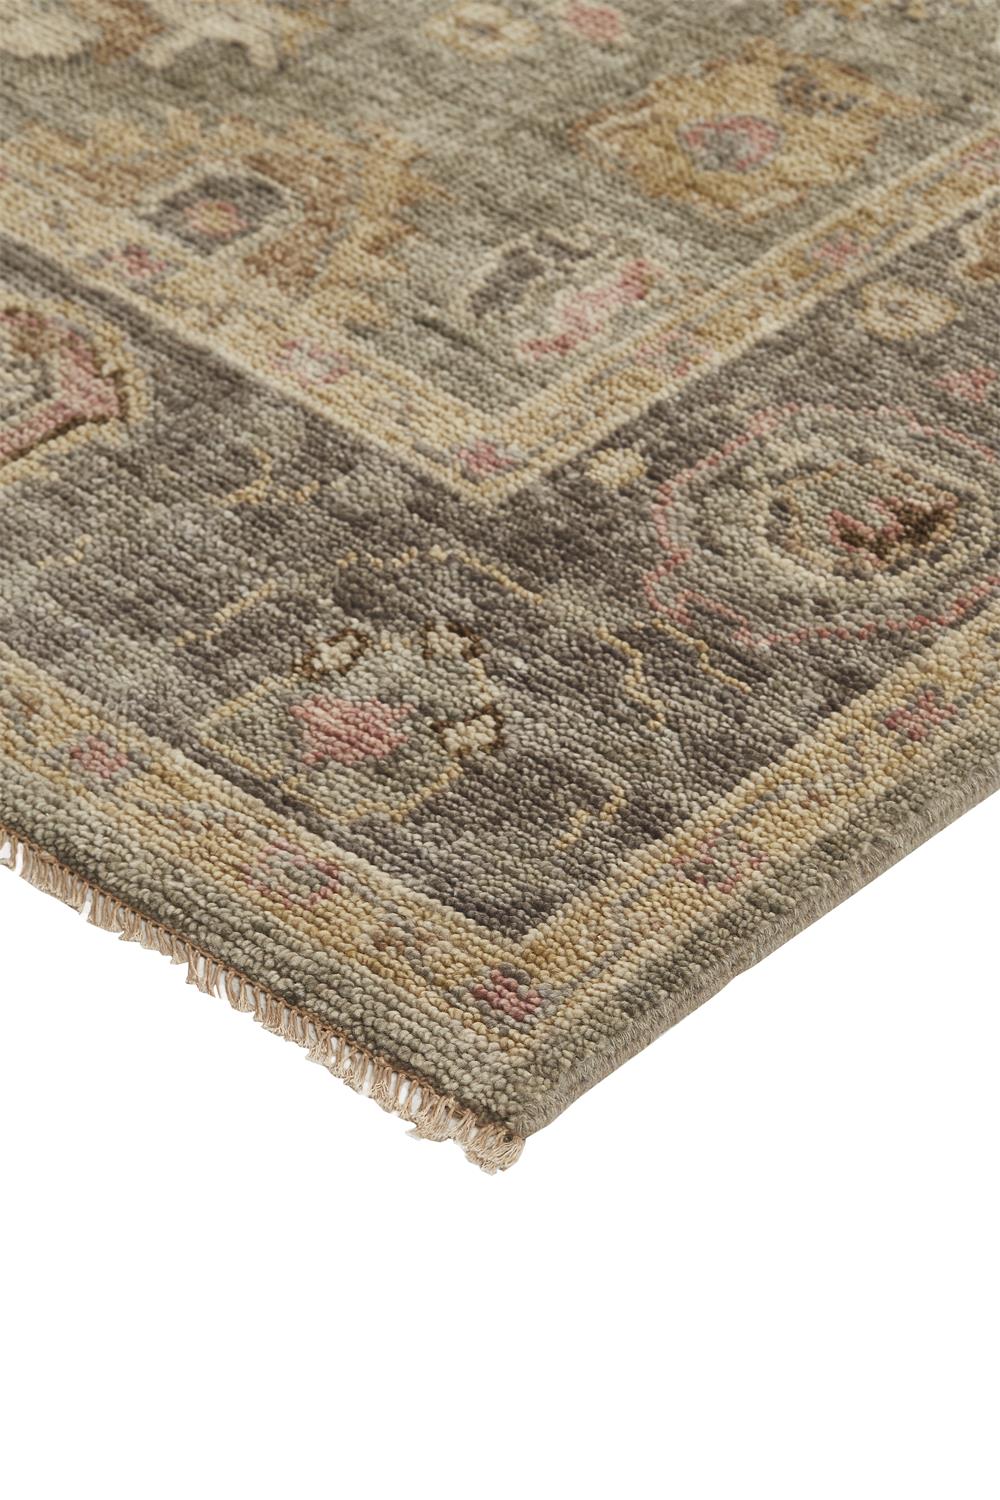 Carrington 6504F Hand Knotted Wool Indoor Area Rug by Feizy Rugs